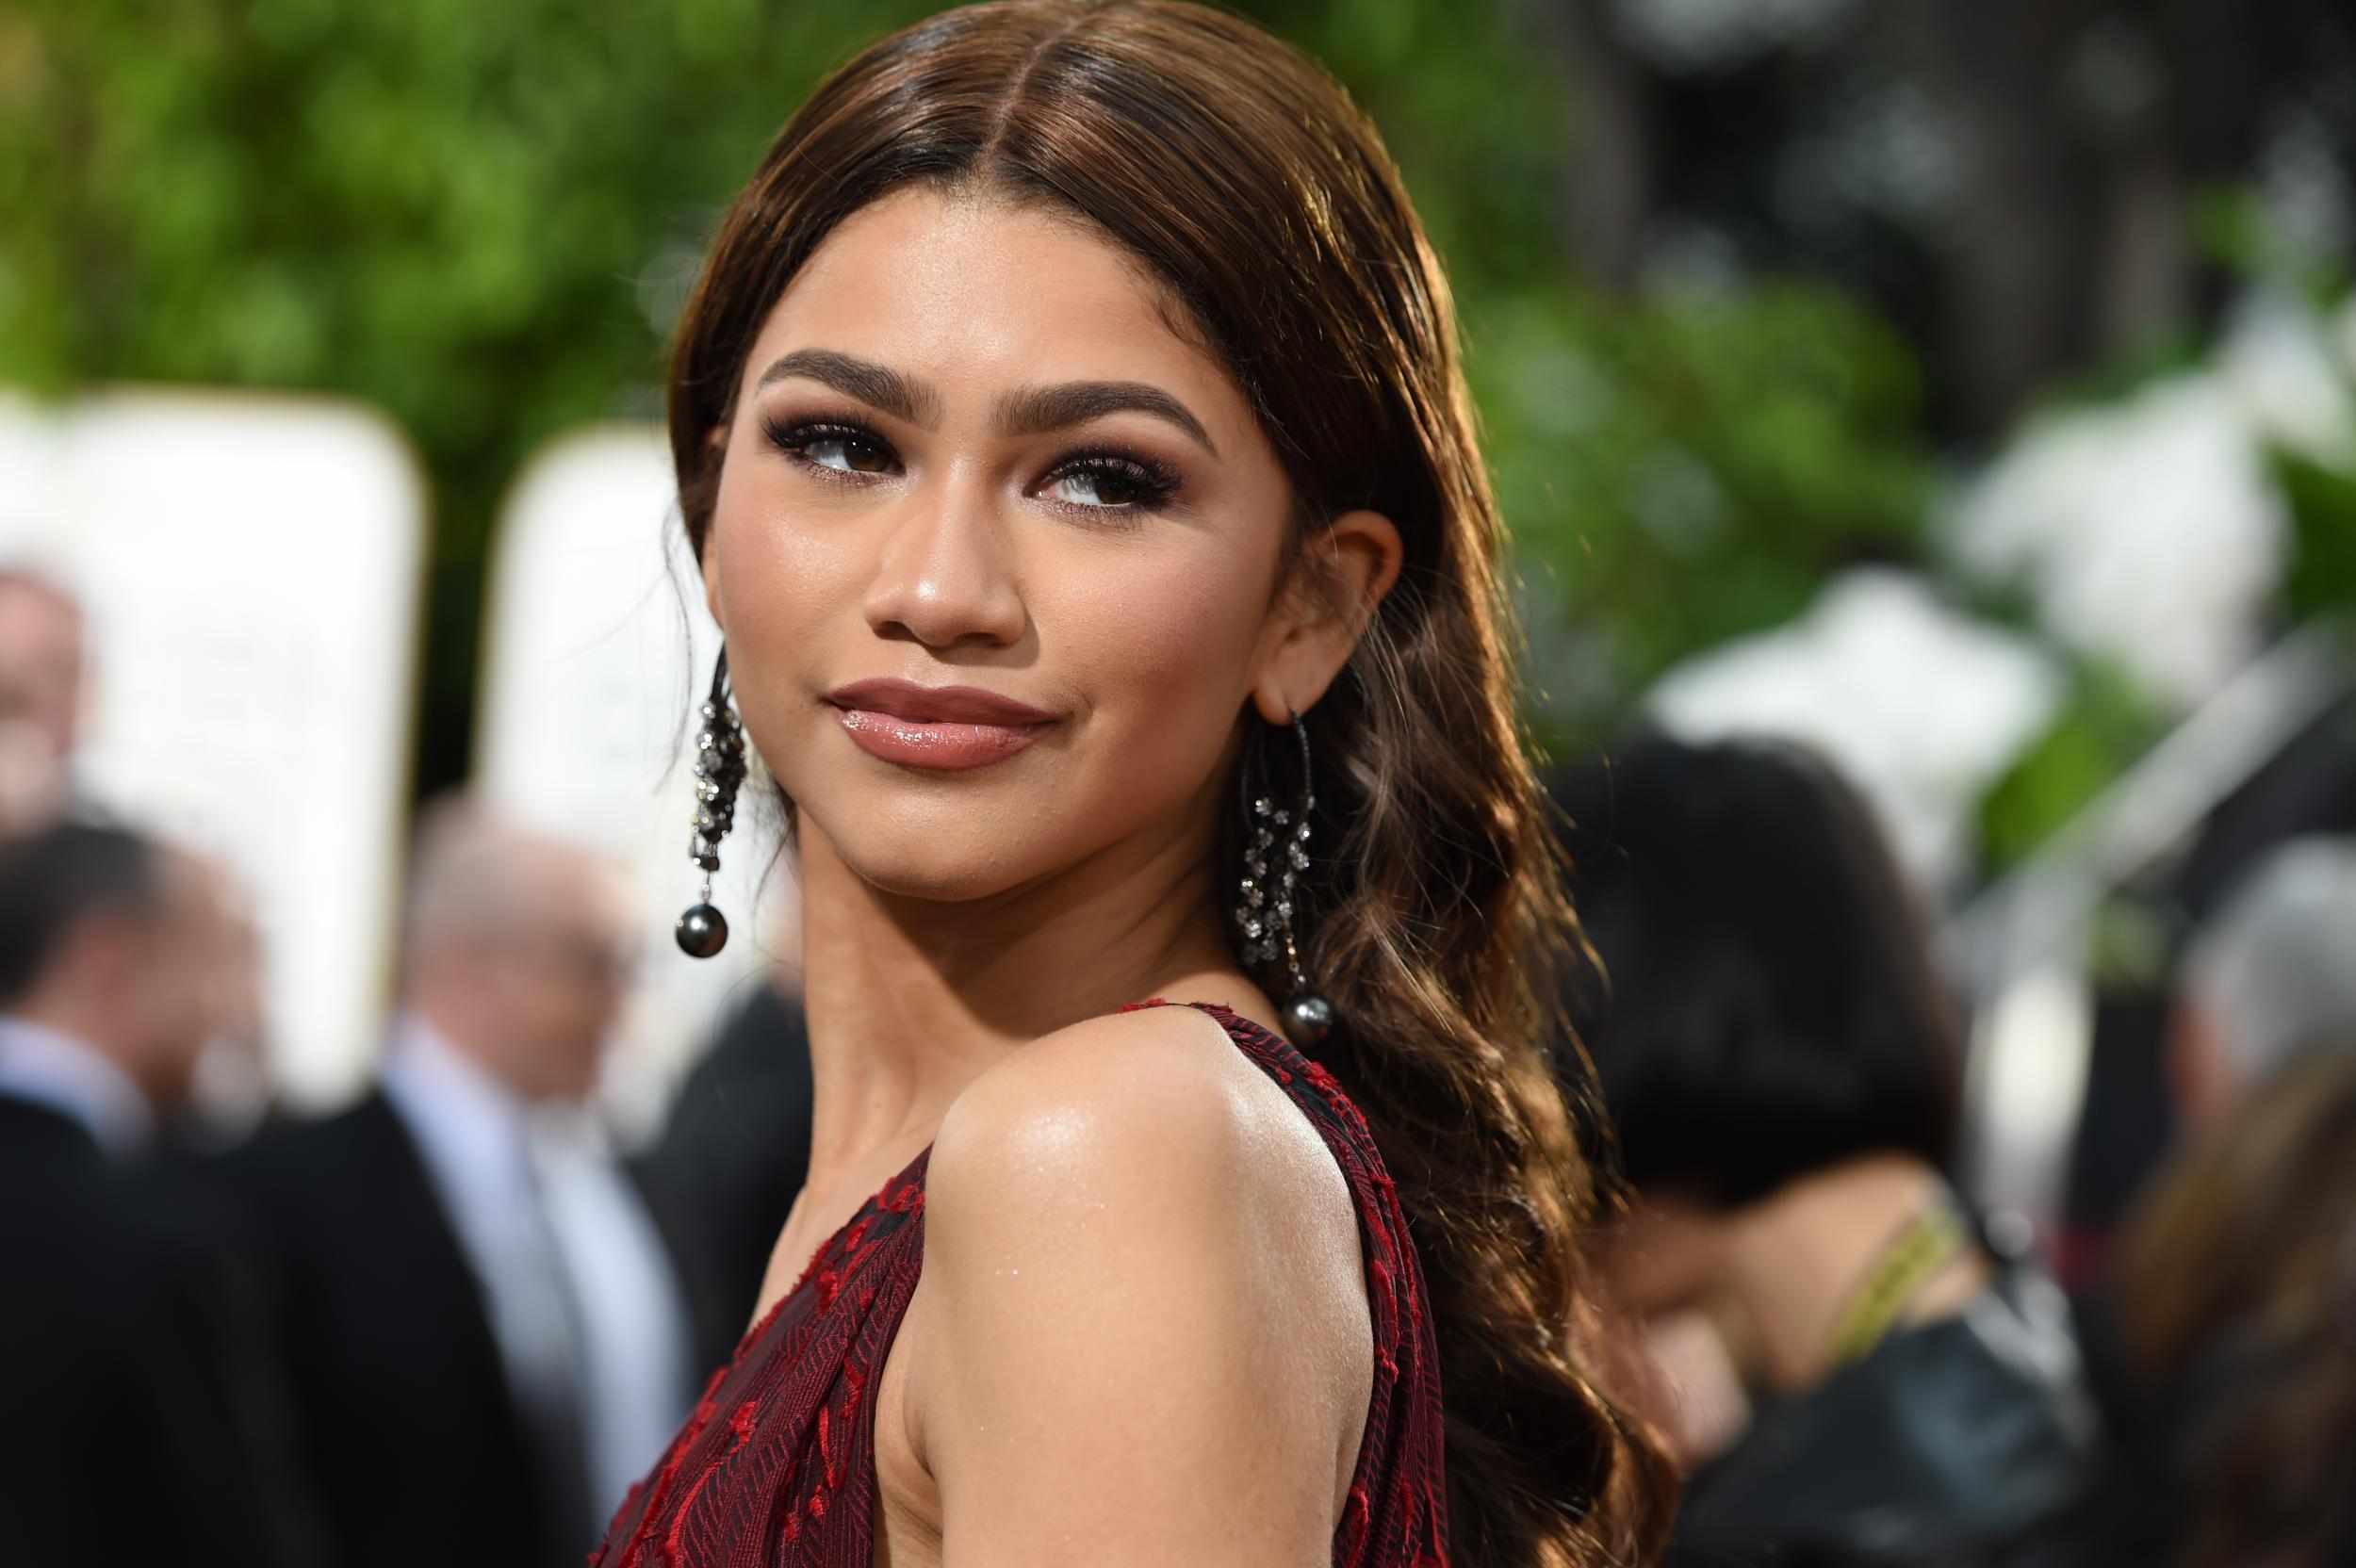 Zendaya has developed a reputation for being outspoken to those who criticise her